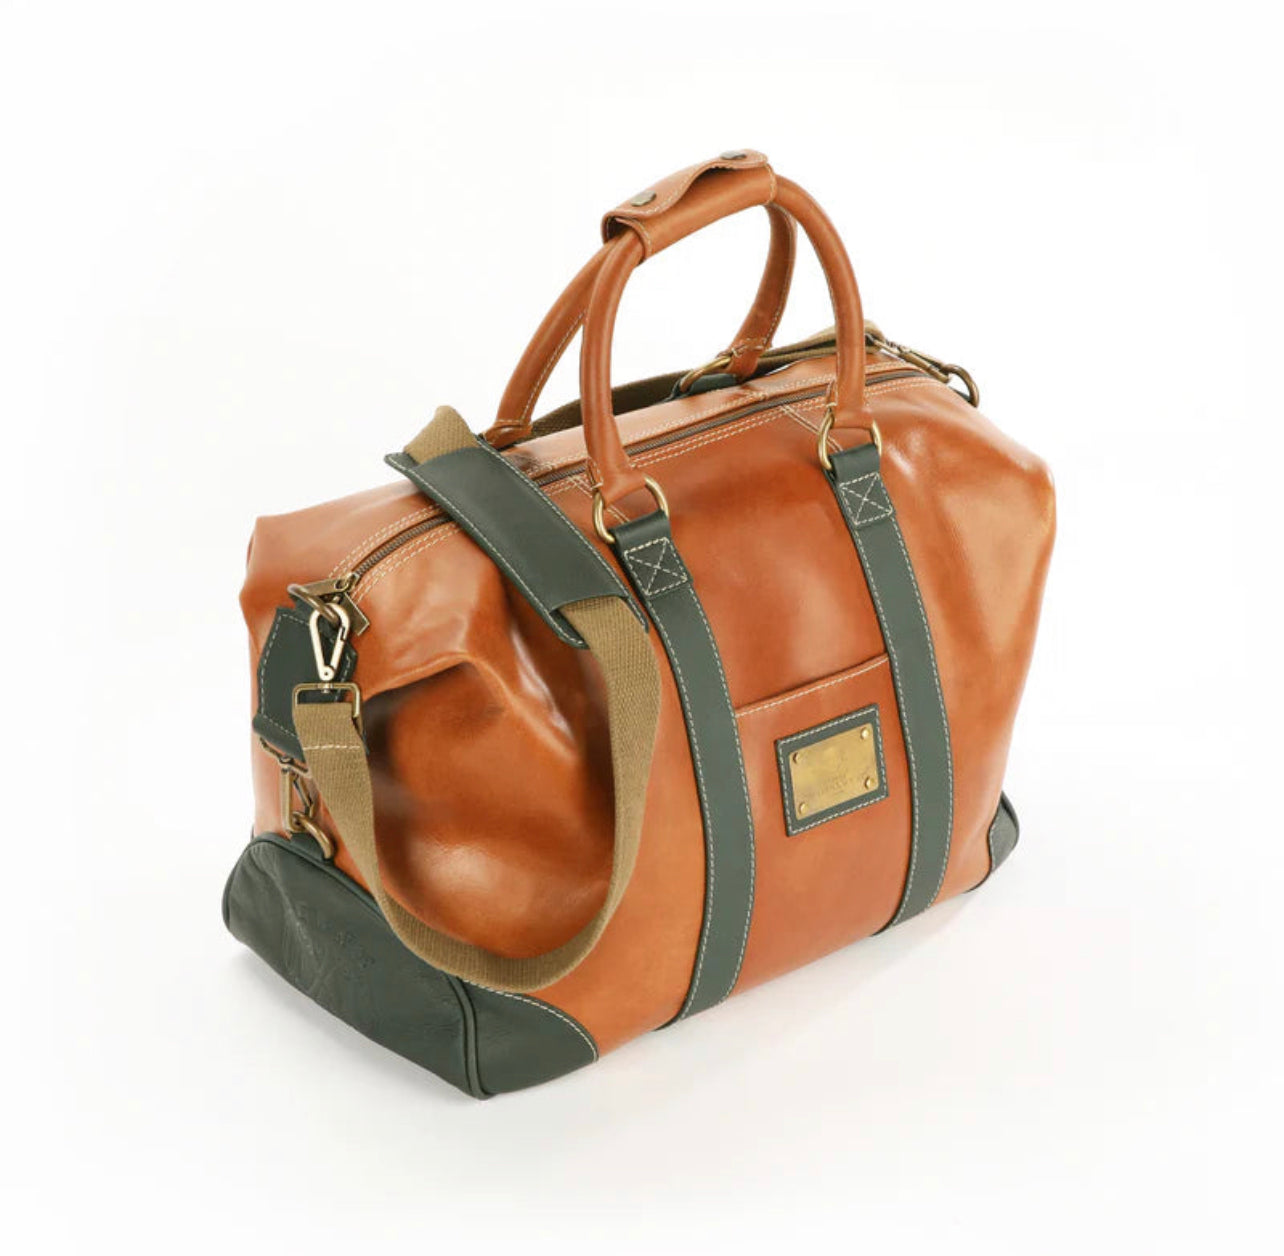 Opus X Society Limited Edition Duffle